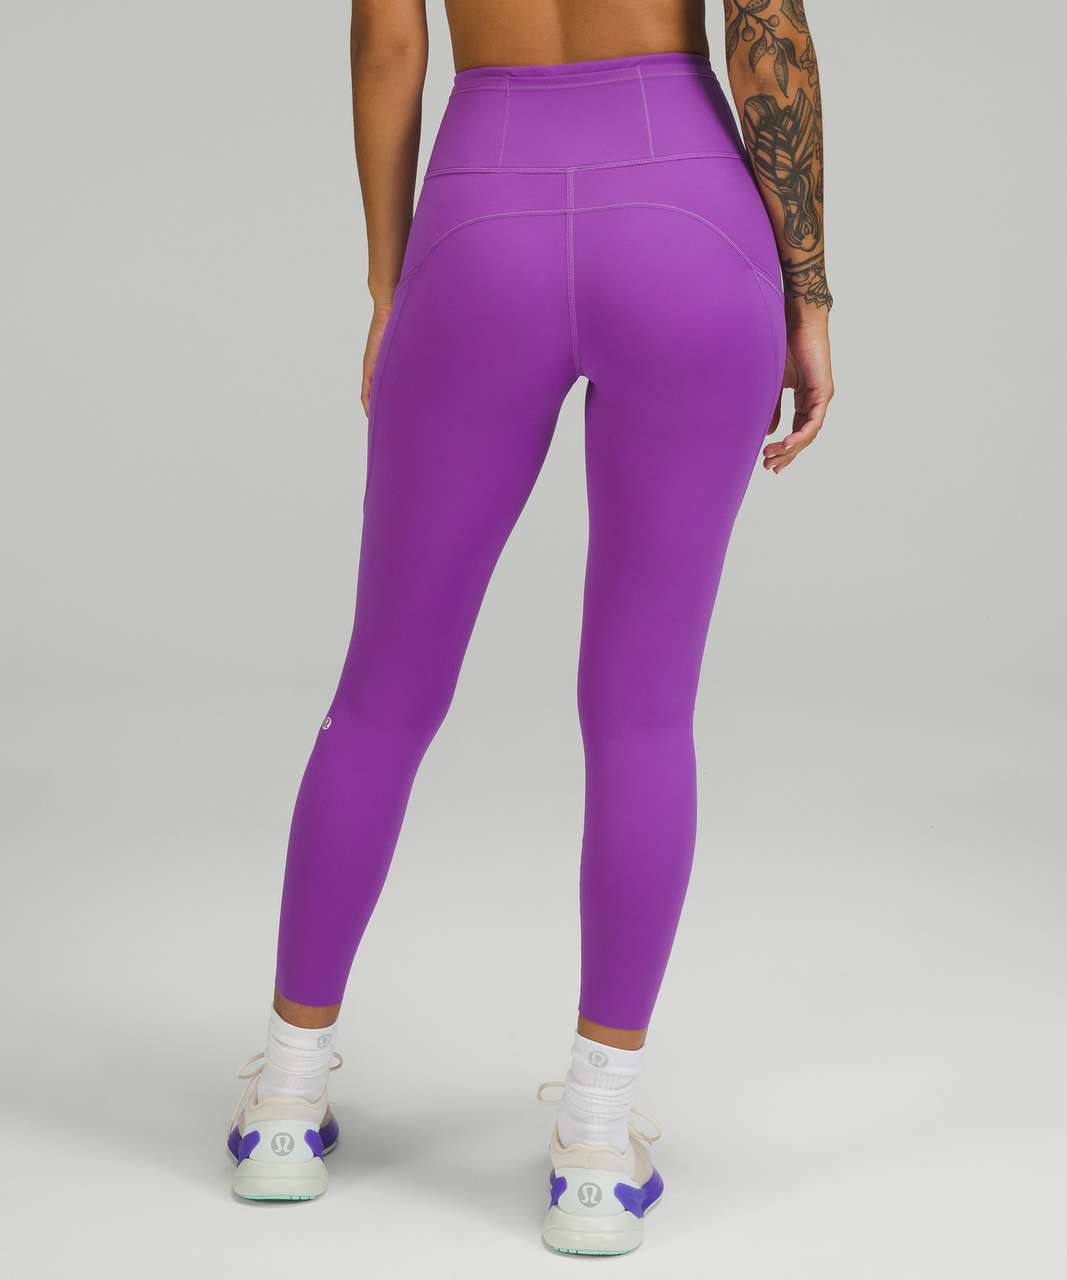 Lululemon Fast and Free High-Rise Tight 25" - Moonlit Magenta